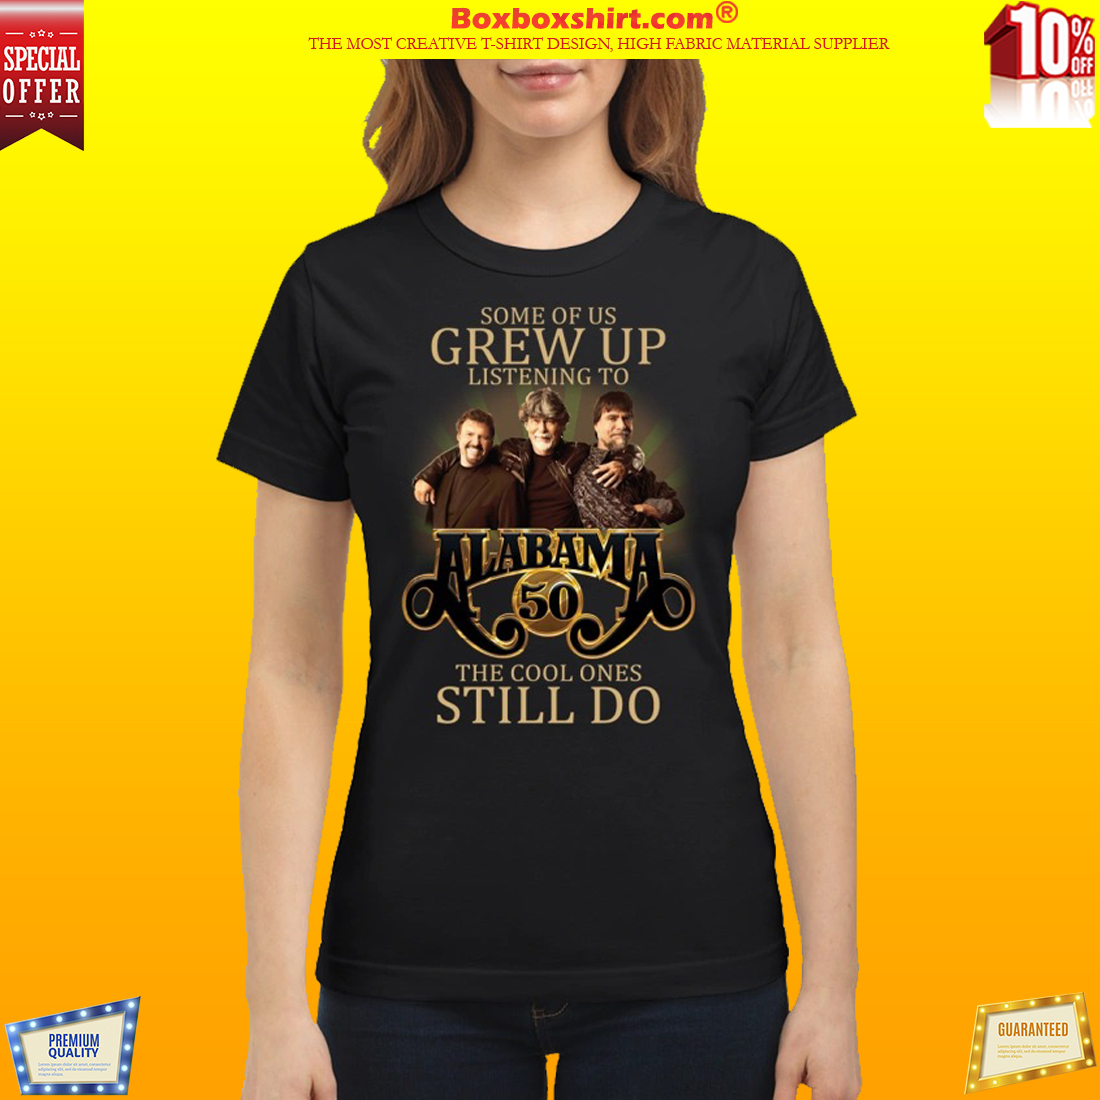 Grew up listening to alabama hymns and gospel cool ones still do classic shirt